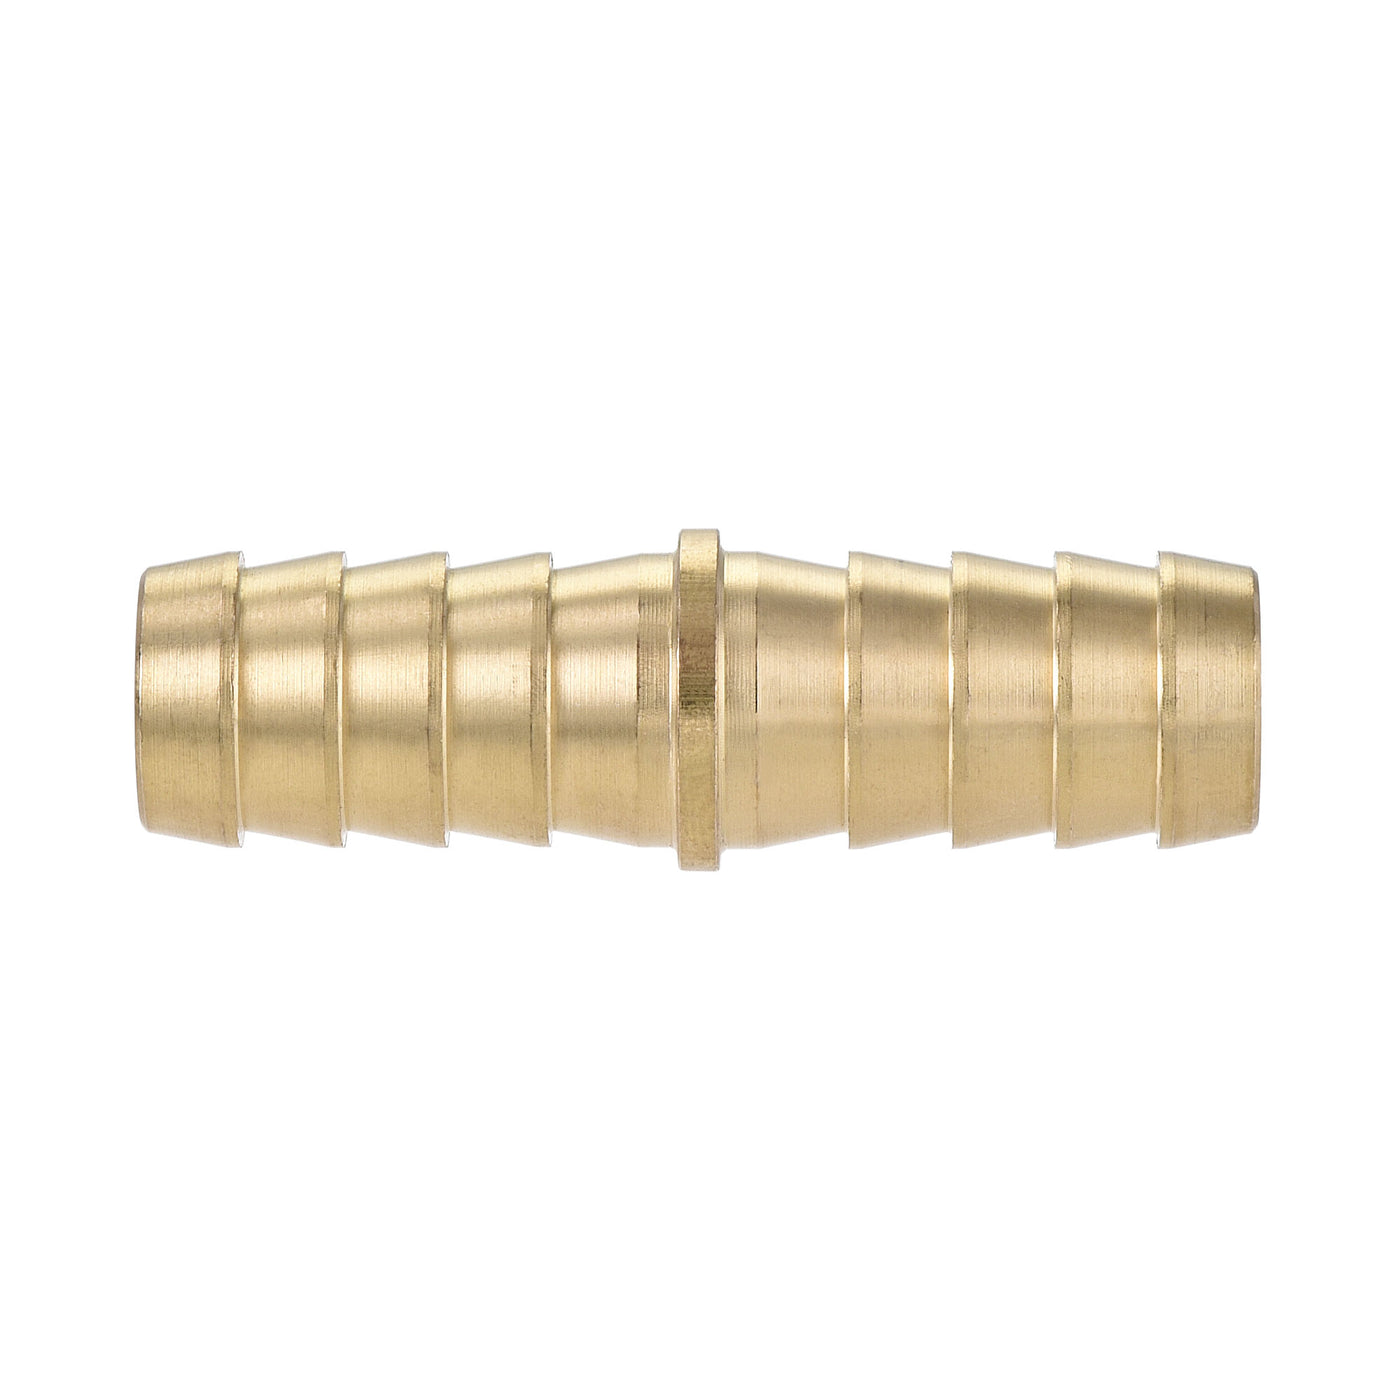 uxcell Uxcell Hose Barb Fitting, 1/2x1/2inch Brass Hollow Straight Quick Connector for Water Fuel Air Oil Gas, Pack of 2